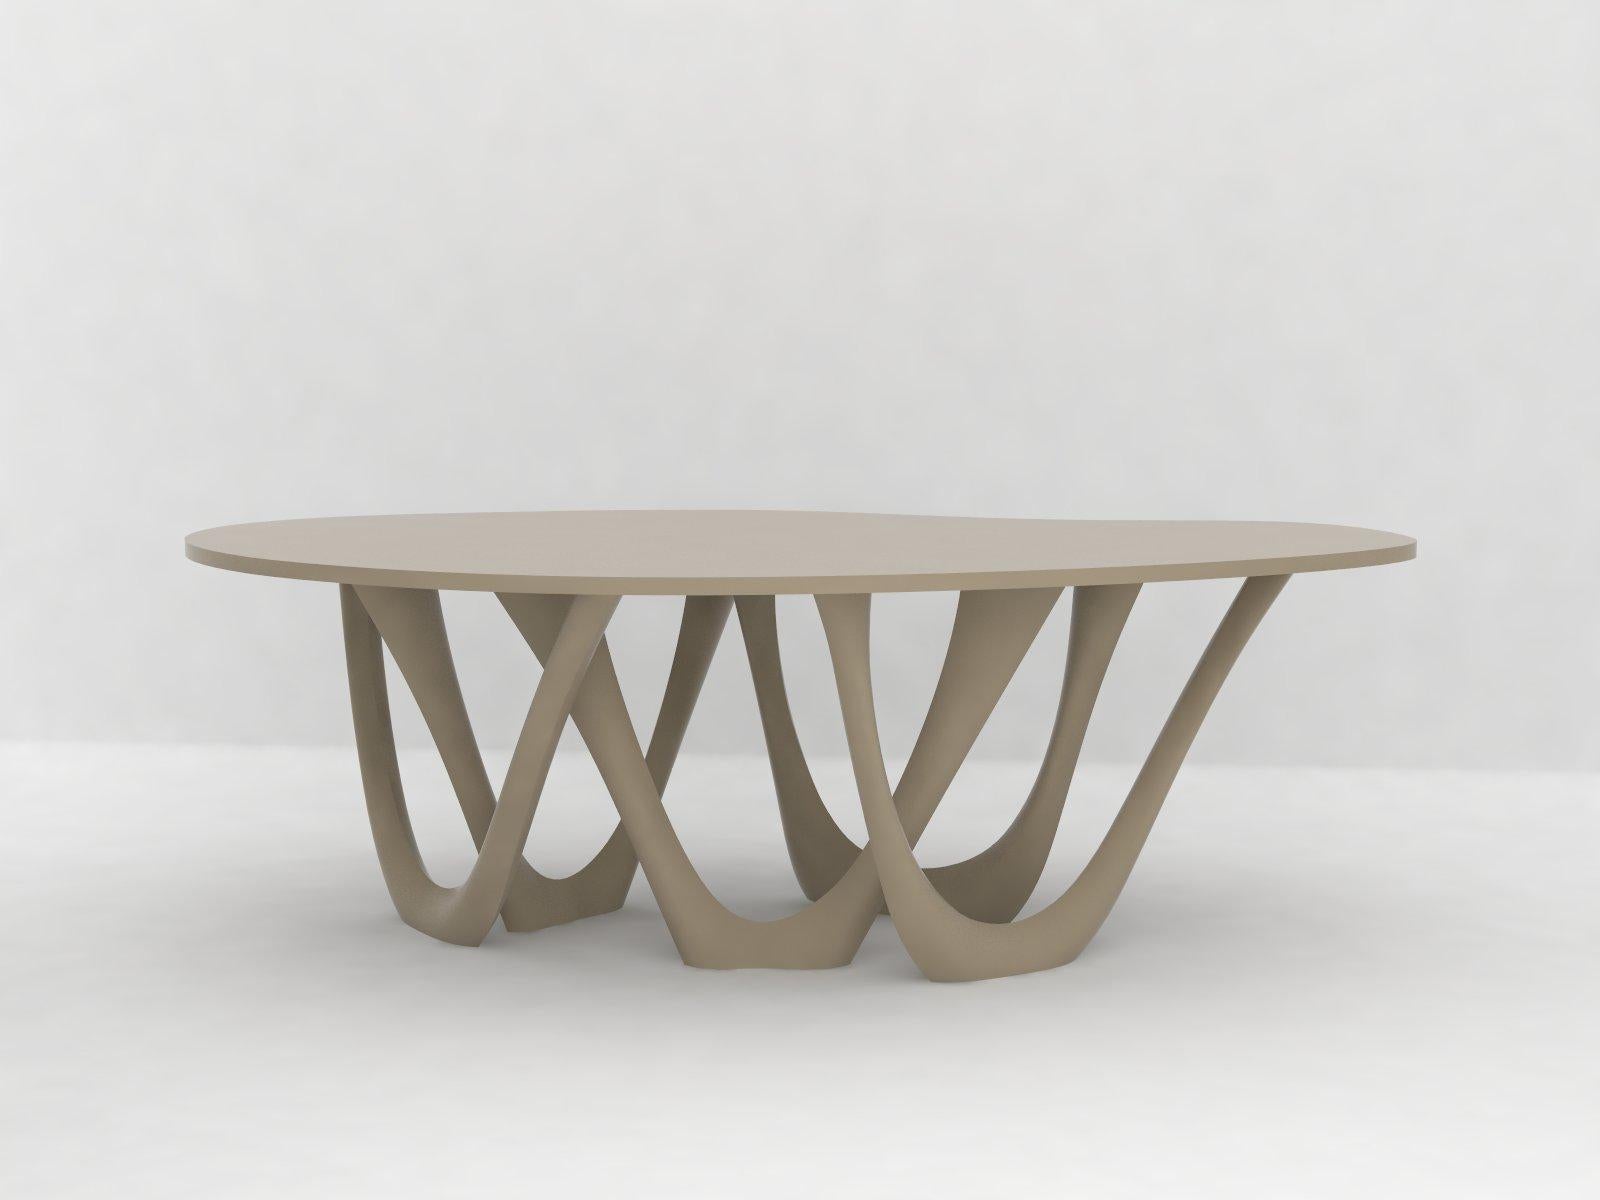 We use parametric design software to generate G-Table form. Modifying a few variables lets us create a miniature model as well as a huge pavilion. Delicate structure of table legs may become stocky and dominating. All those factors cause G-Table to